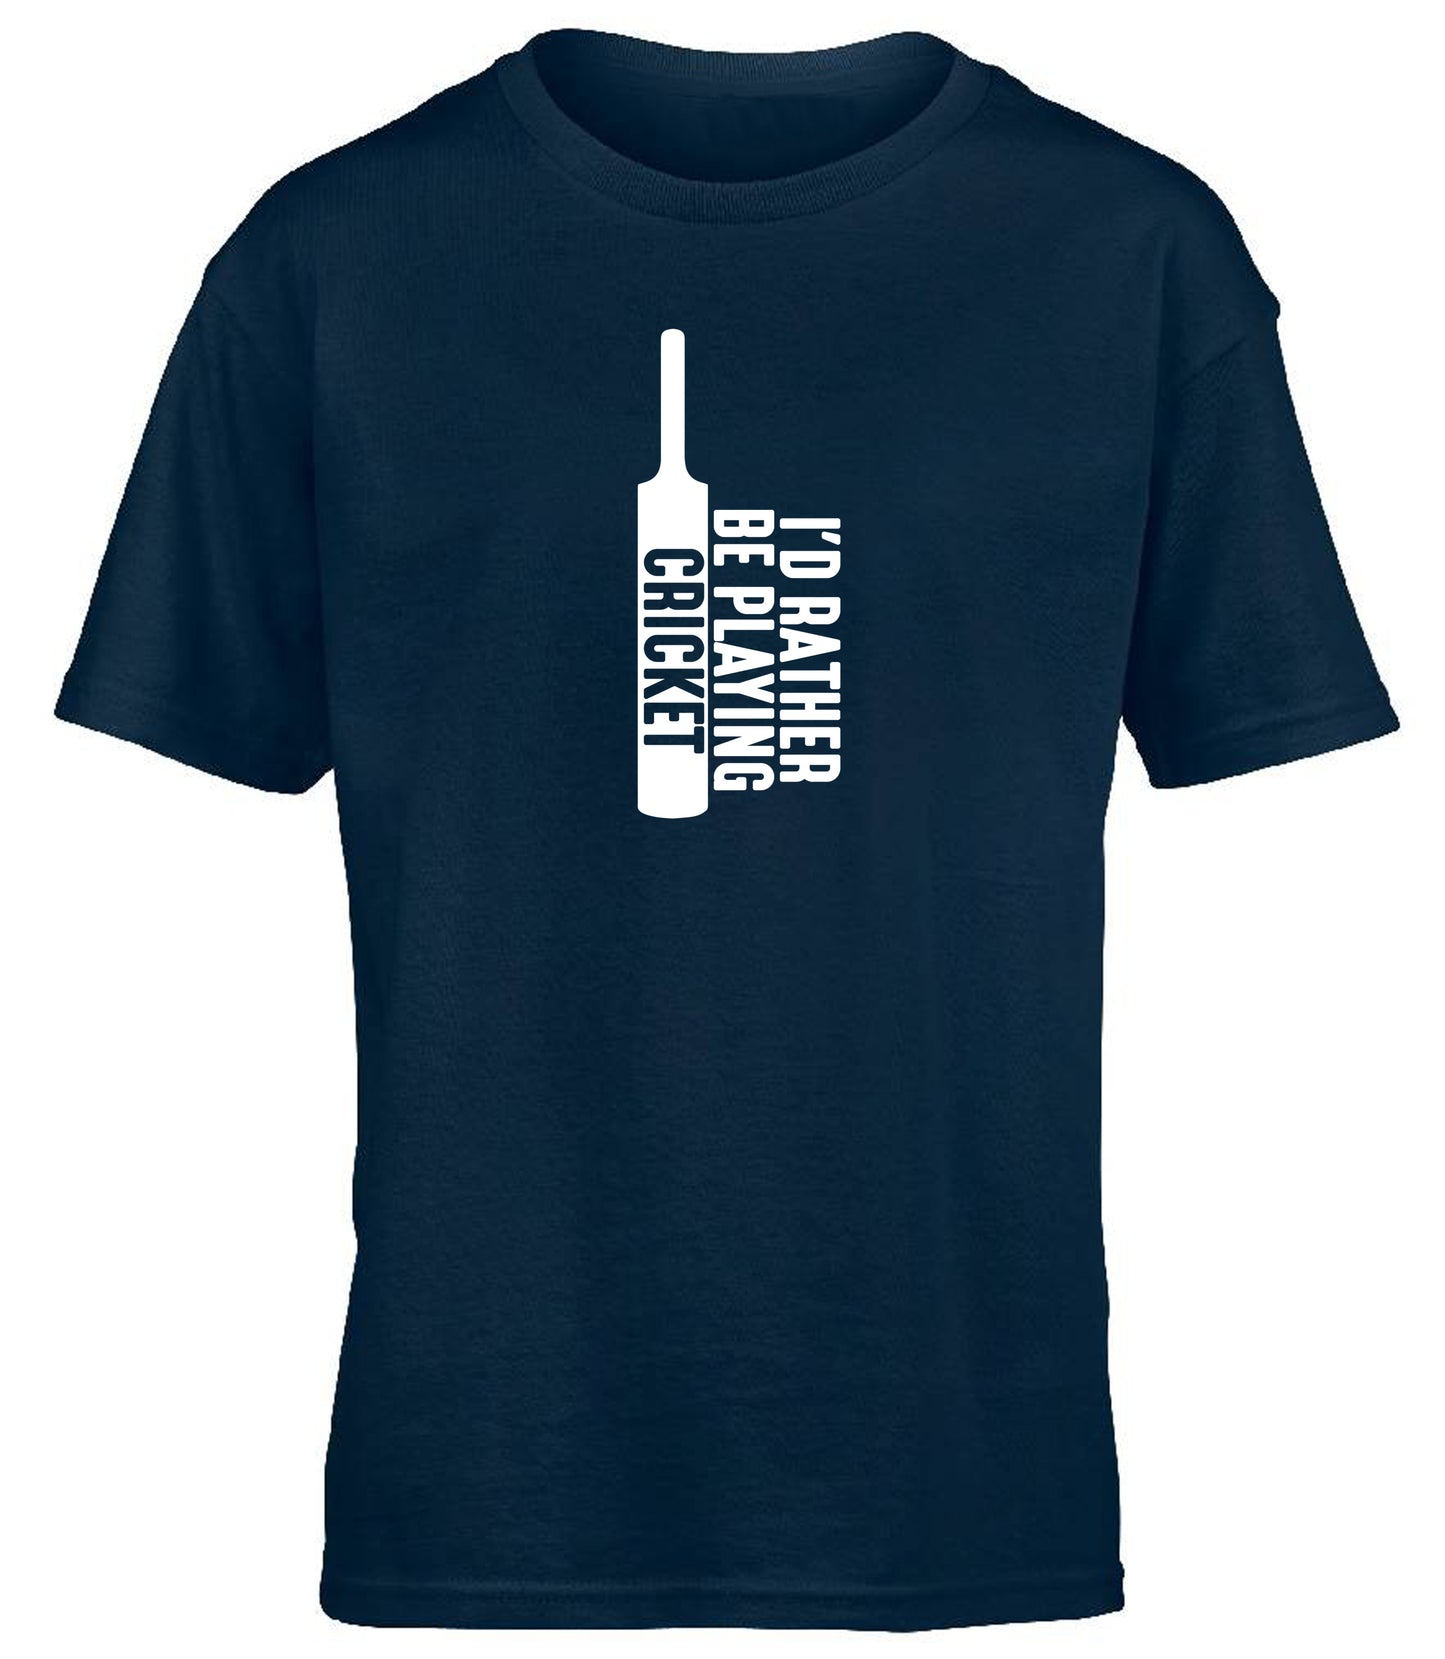 I'd Rather Be Playing Cricket (Printed Vertically) children's T-shirt